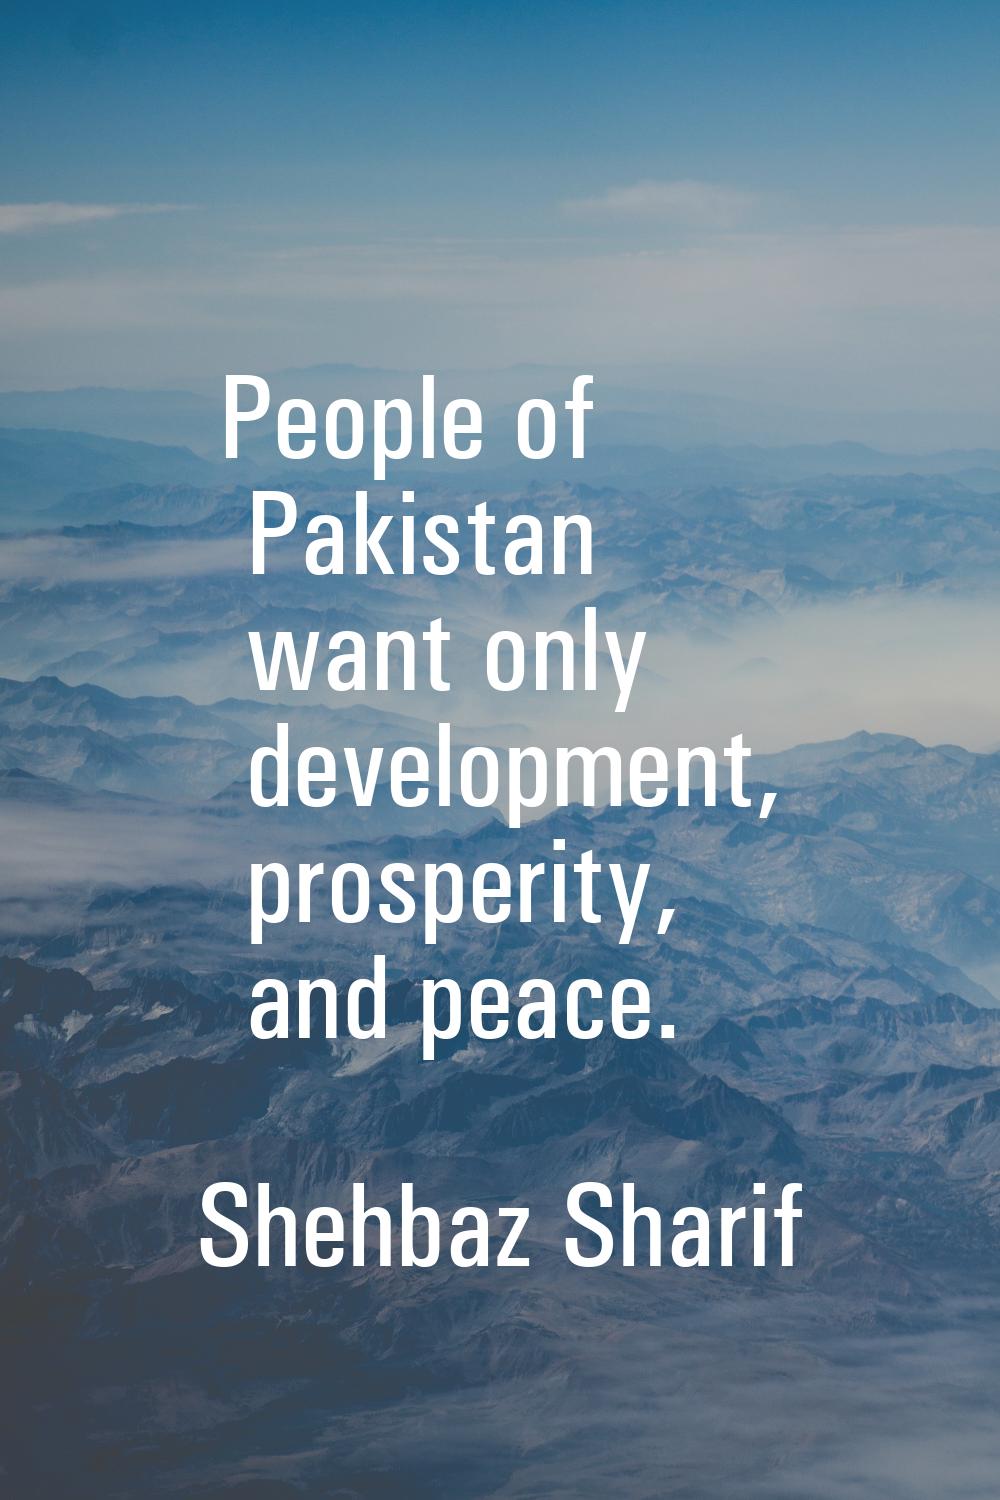 People of Pakistan want only development, prosperity, and peace.